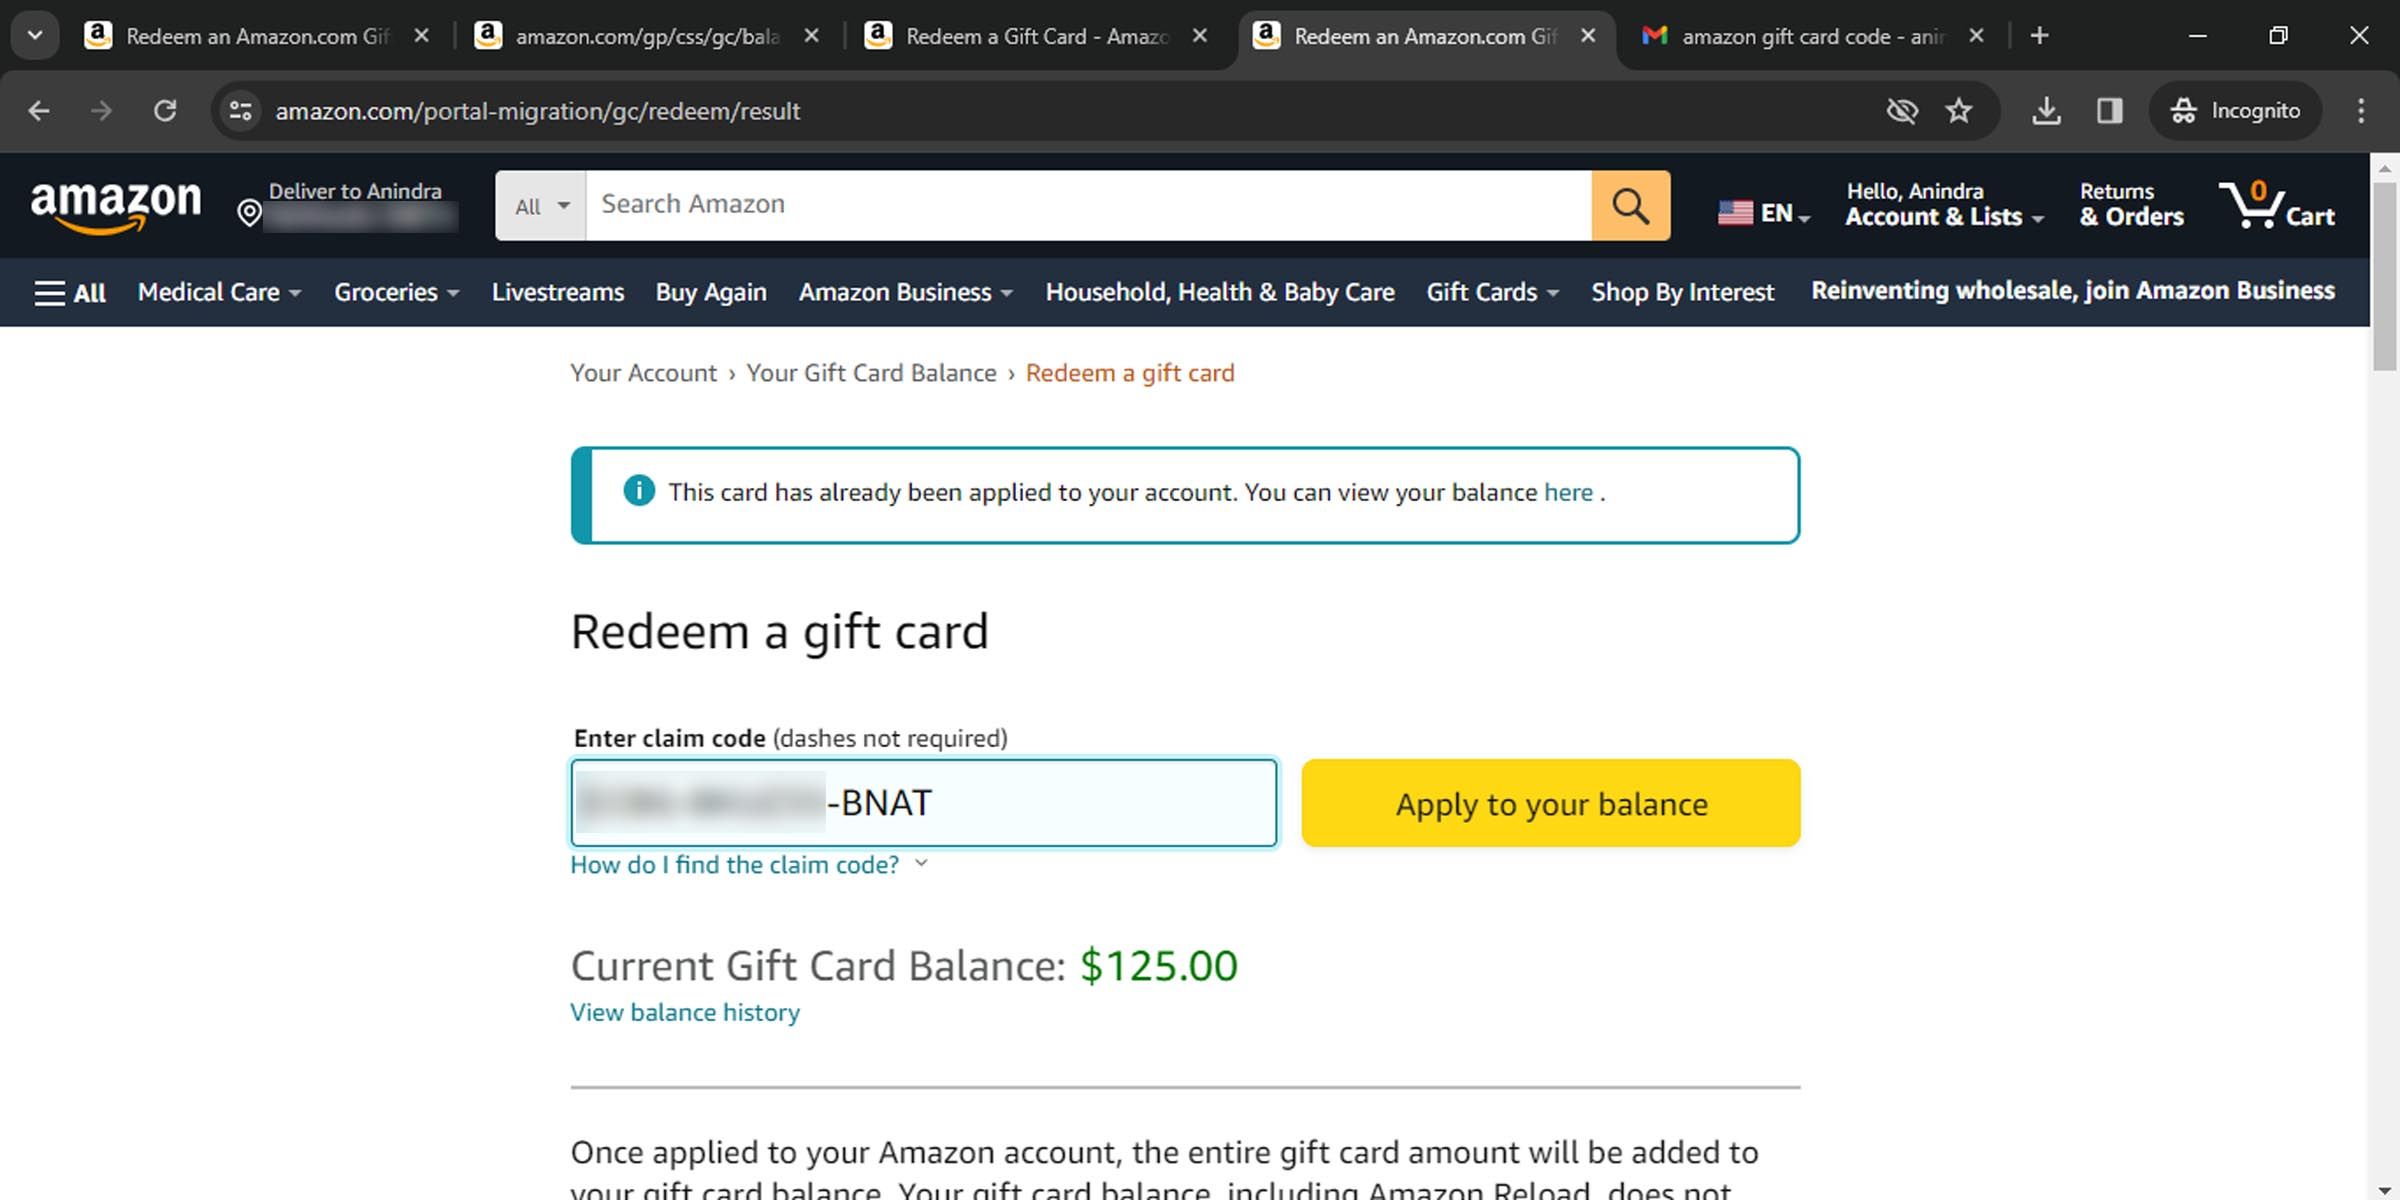 8 Places to Use Amazon Gift Card Besides Amazon - TechWiser